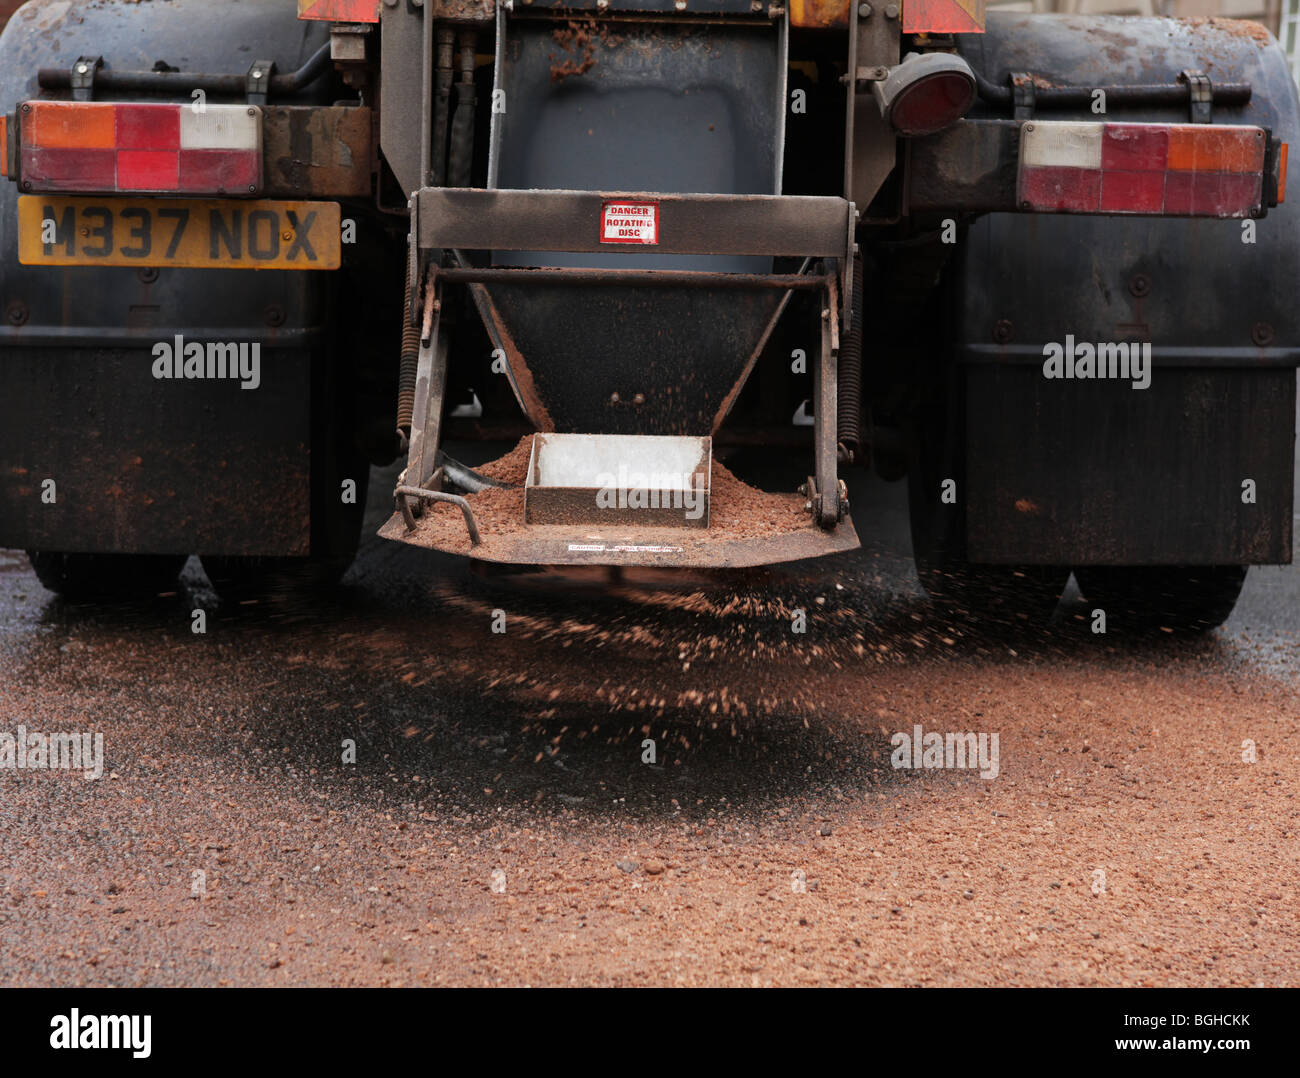 Gritter,snow plough,gritting,snow.ice,winter,2010 Stock Photo